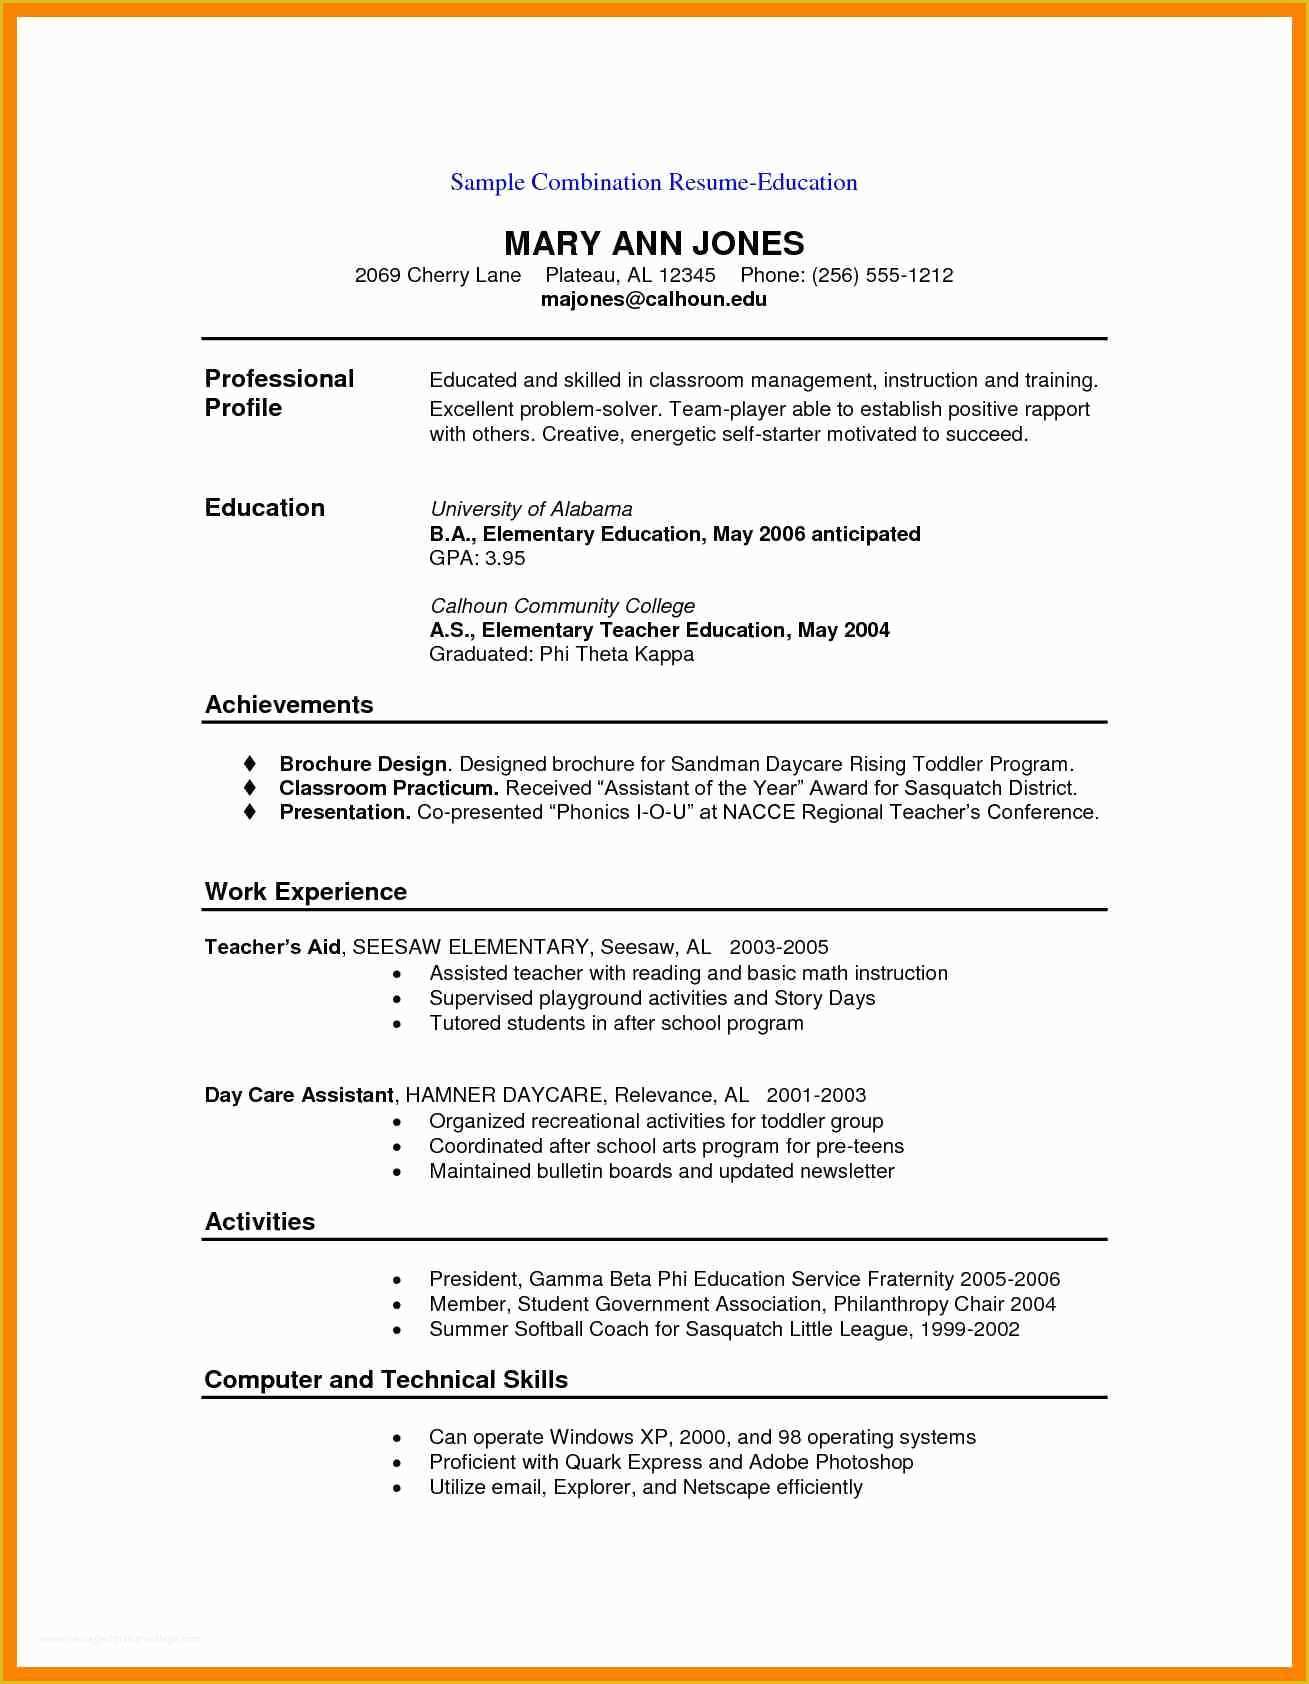 Free Combination Resume Template Of 9 Hybrid Resume Example